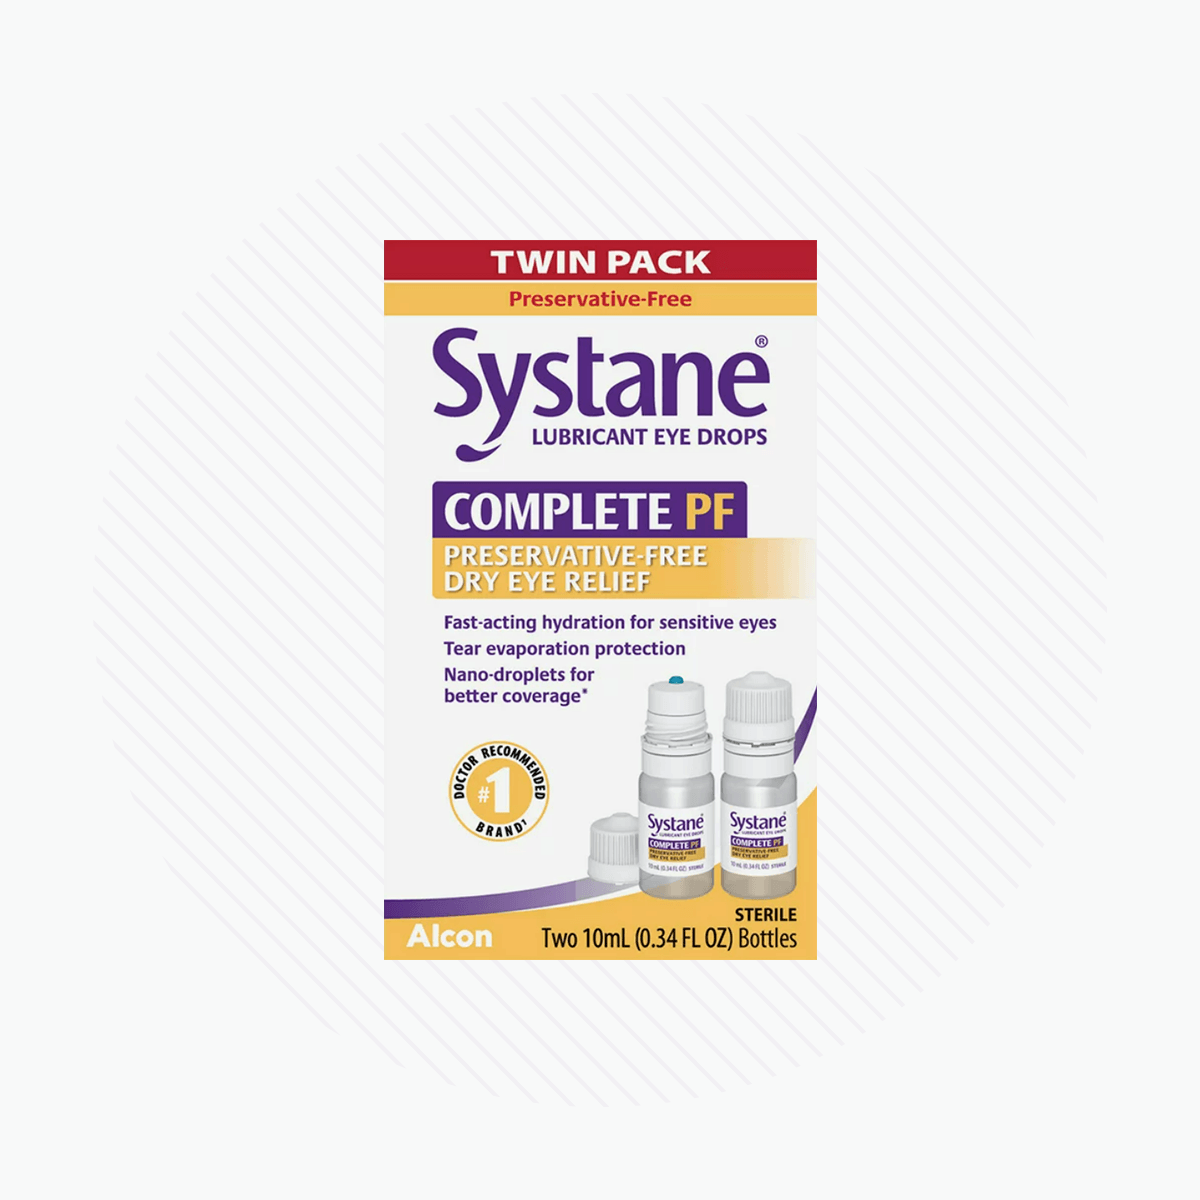 Systane COMPLETE Preservative-Free Eye Drops Multi-Dose Bottle (2 Sizes) - Dryeye Rescue